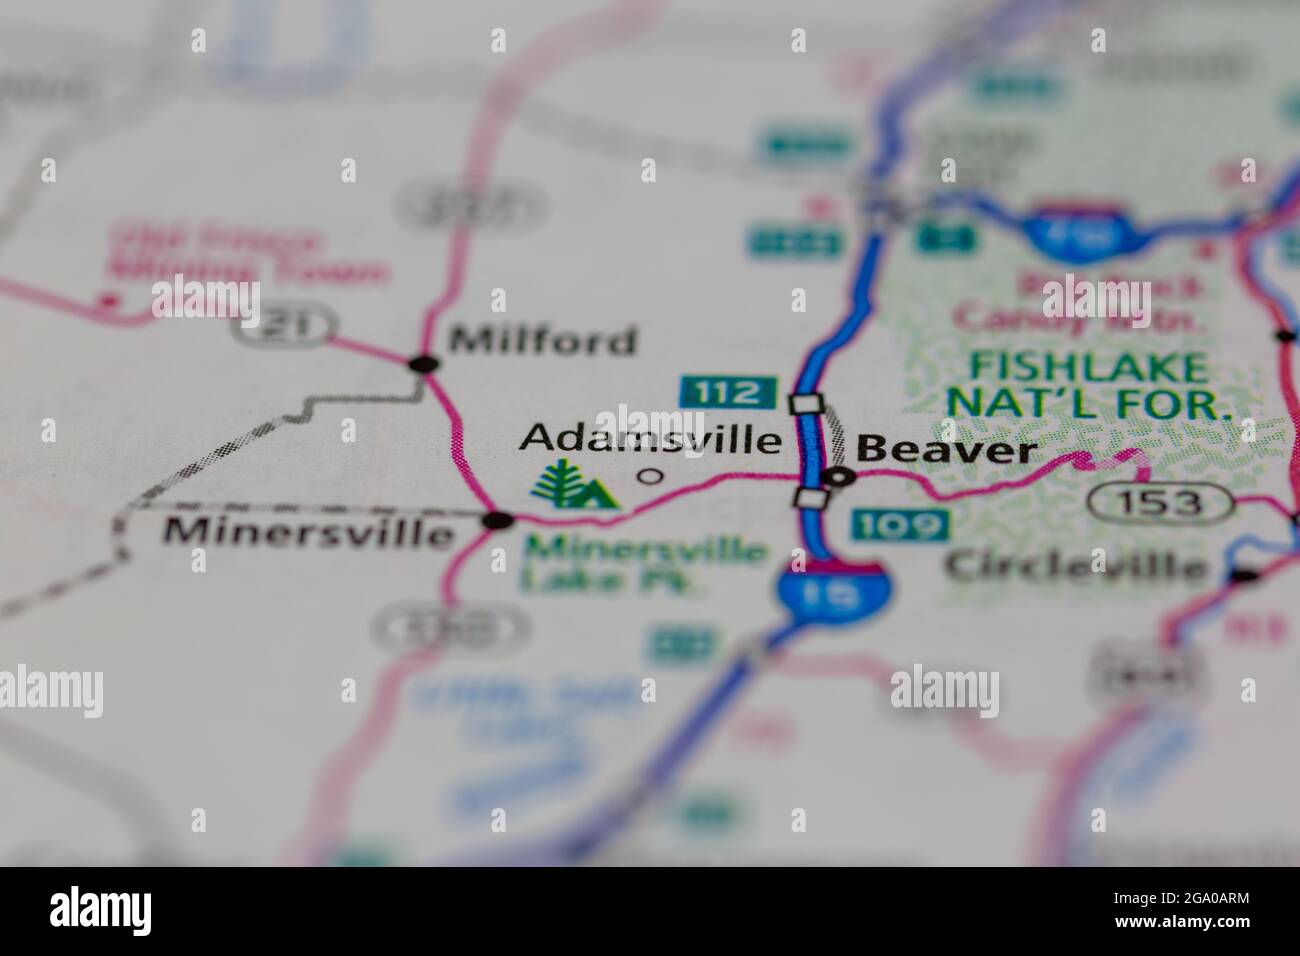 Adamsville Utah USA shown on a road map or Geography map Stock Photo